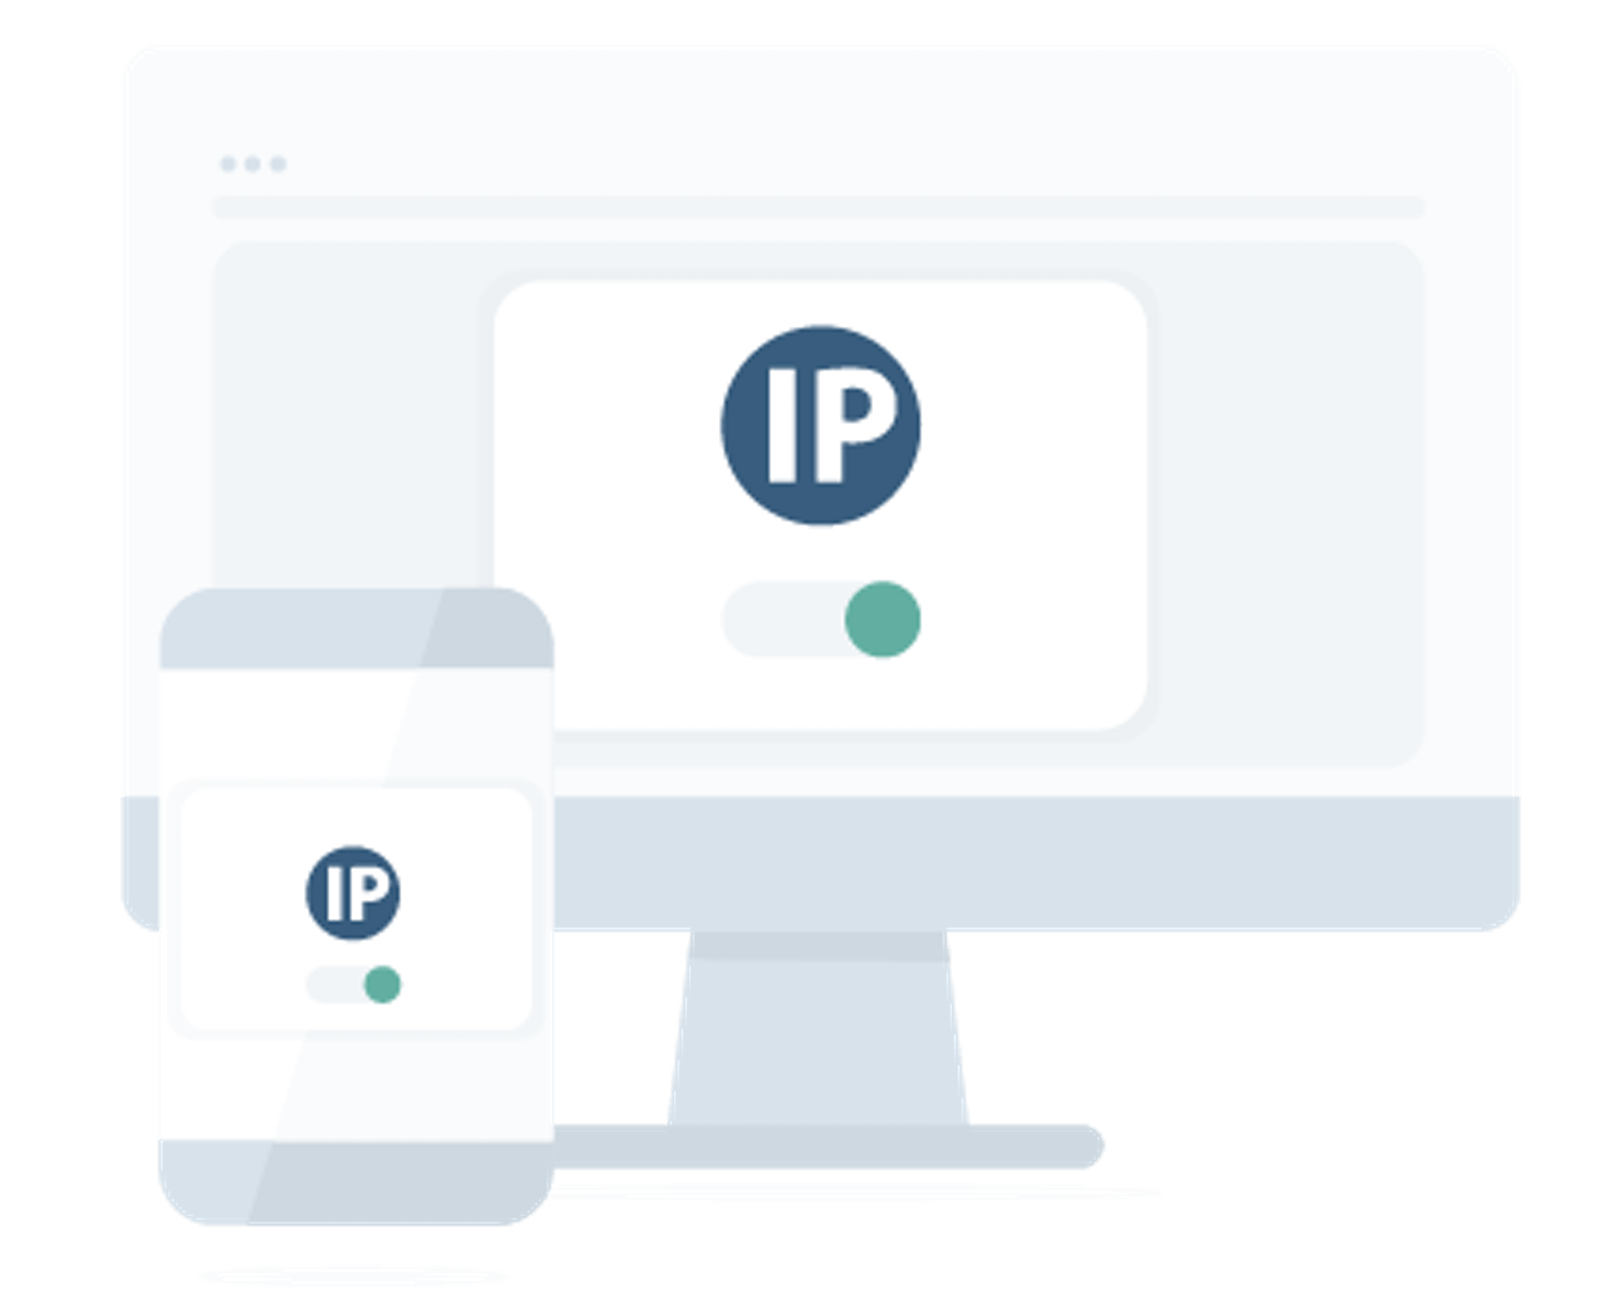 What is an IP subnetwork